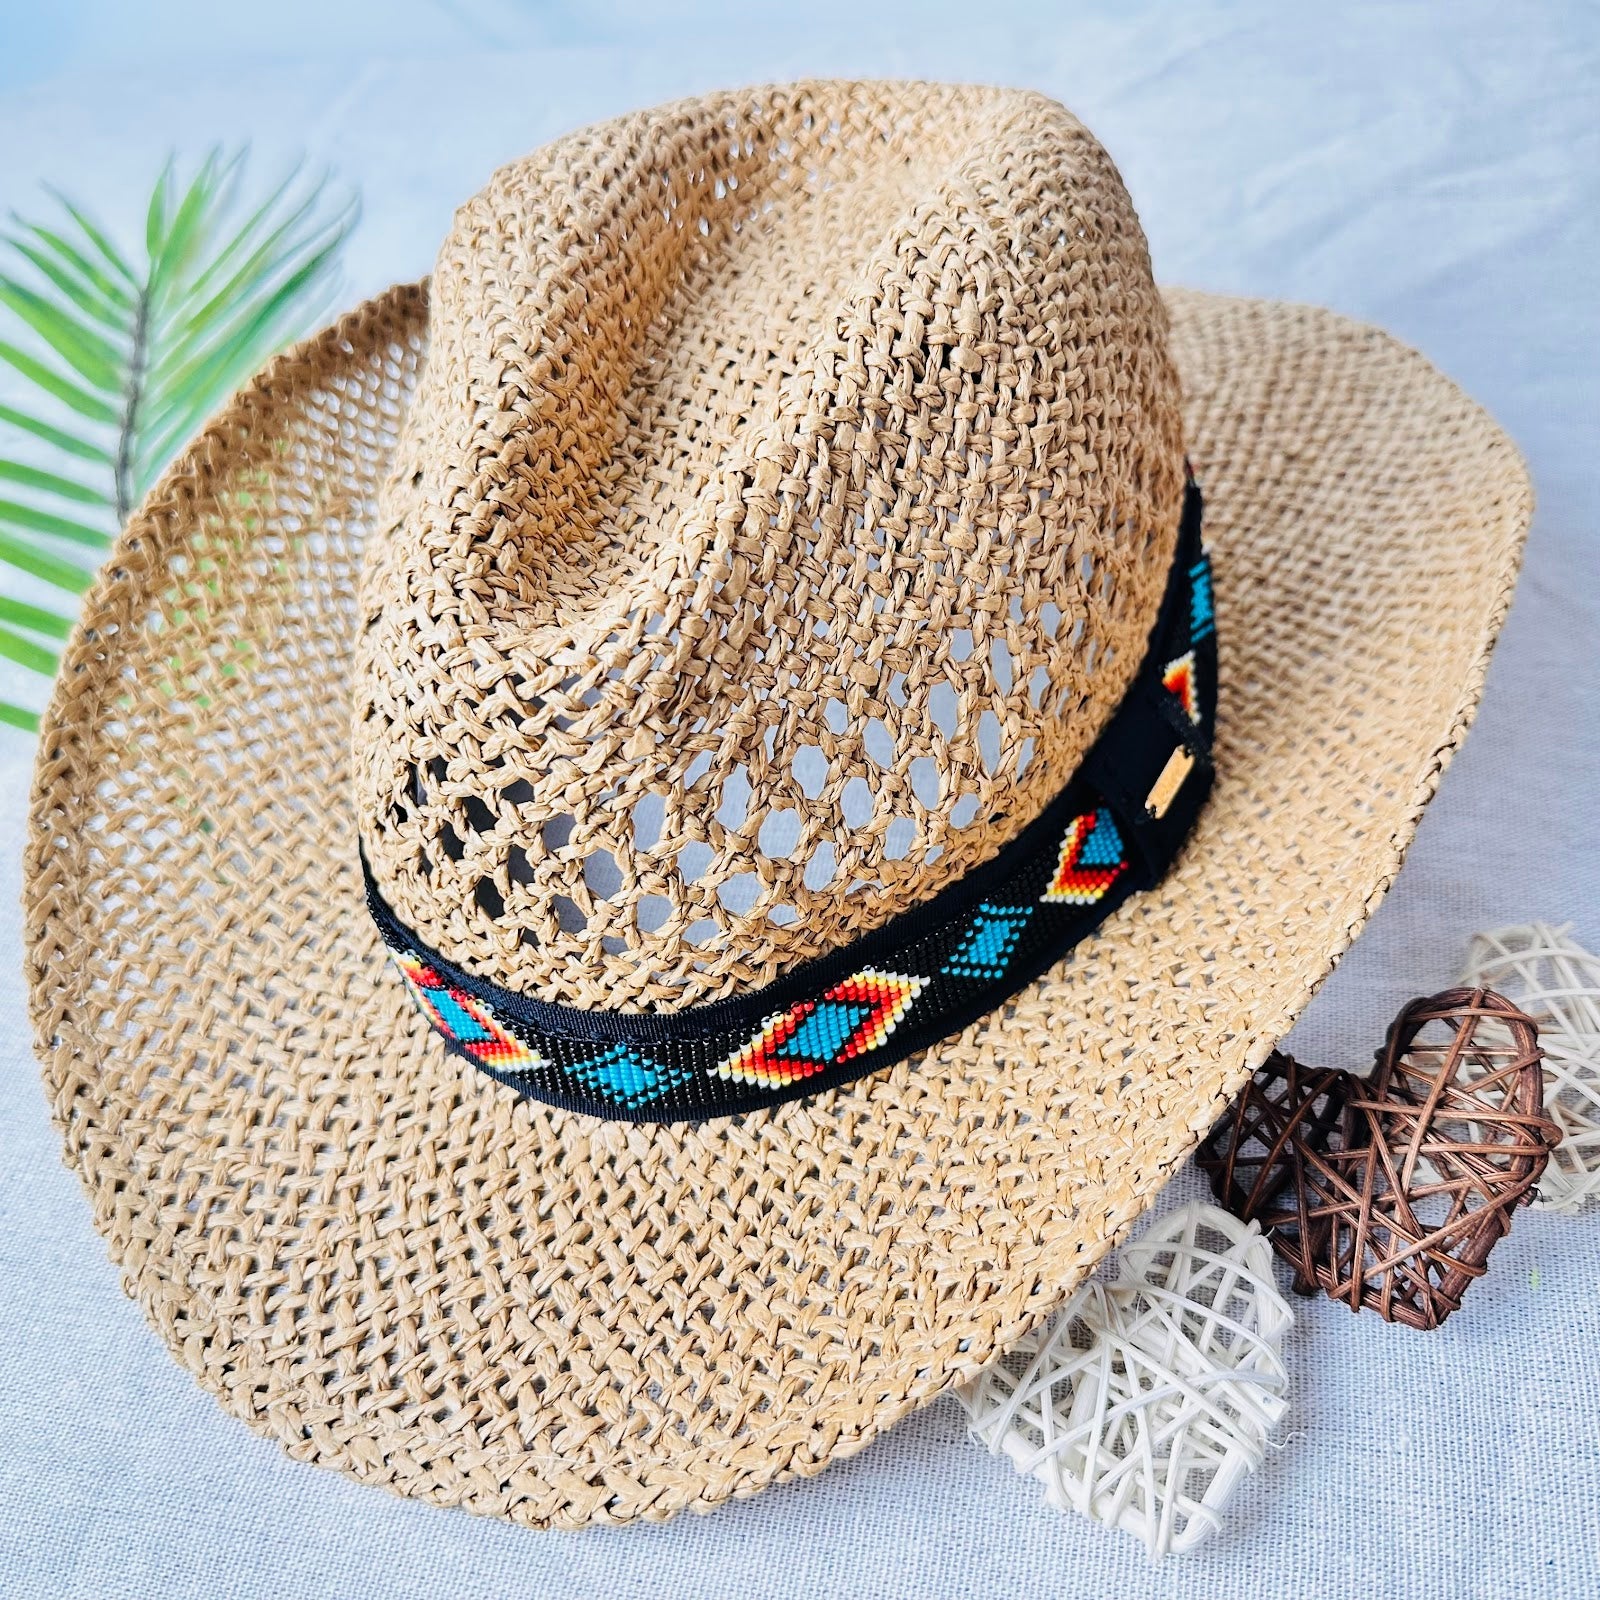 SALE 50% OFF - Straw Cowboy Cowgirl Hat With Hatband Beaded Brim Native American Style